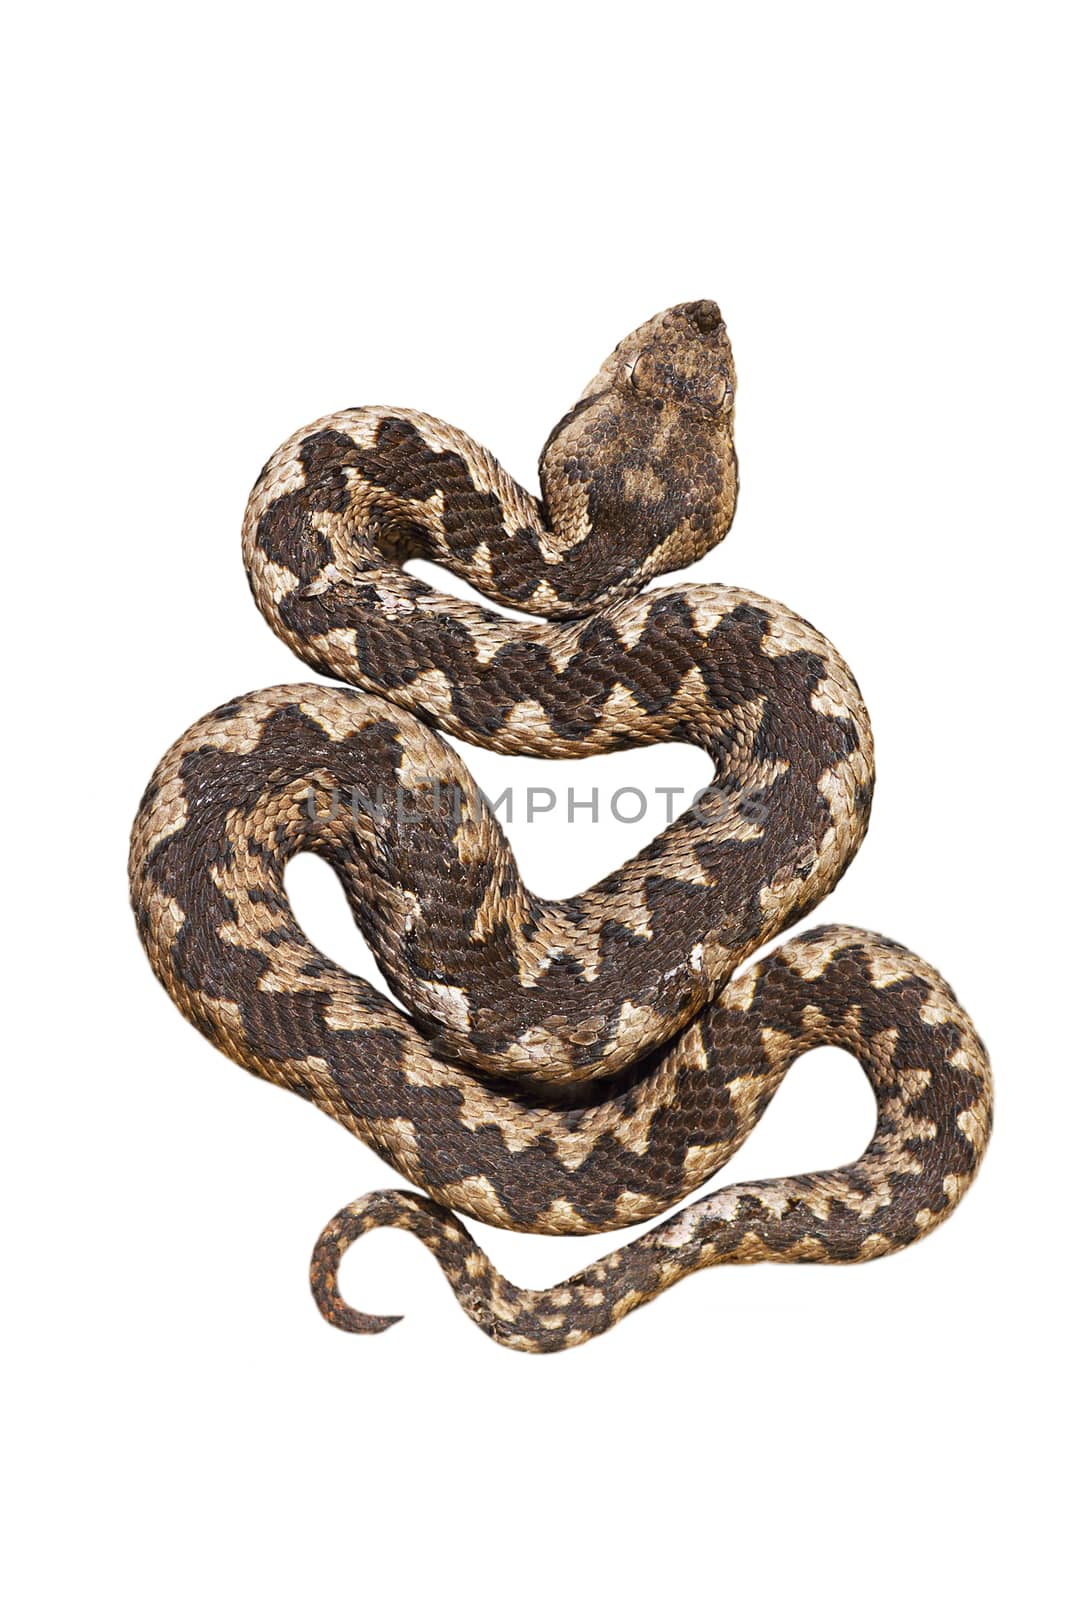 isolated nosed viper, Vipera ammodytes or the long horn adder, one of the most dangerous european snakes; isolation over white background for your design